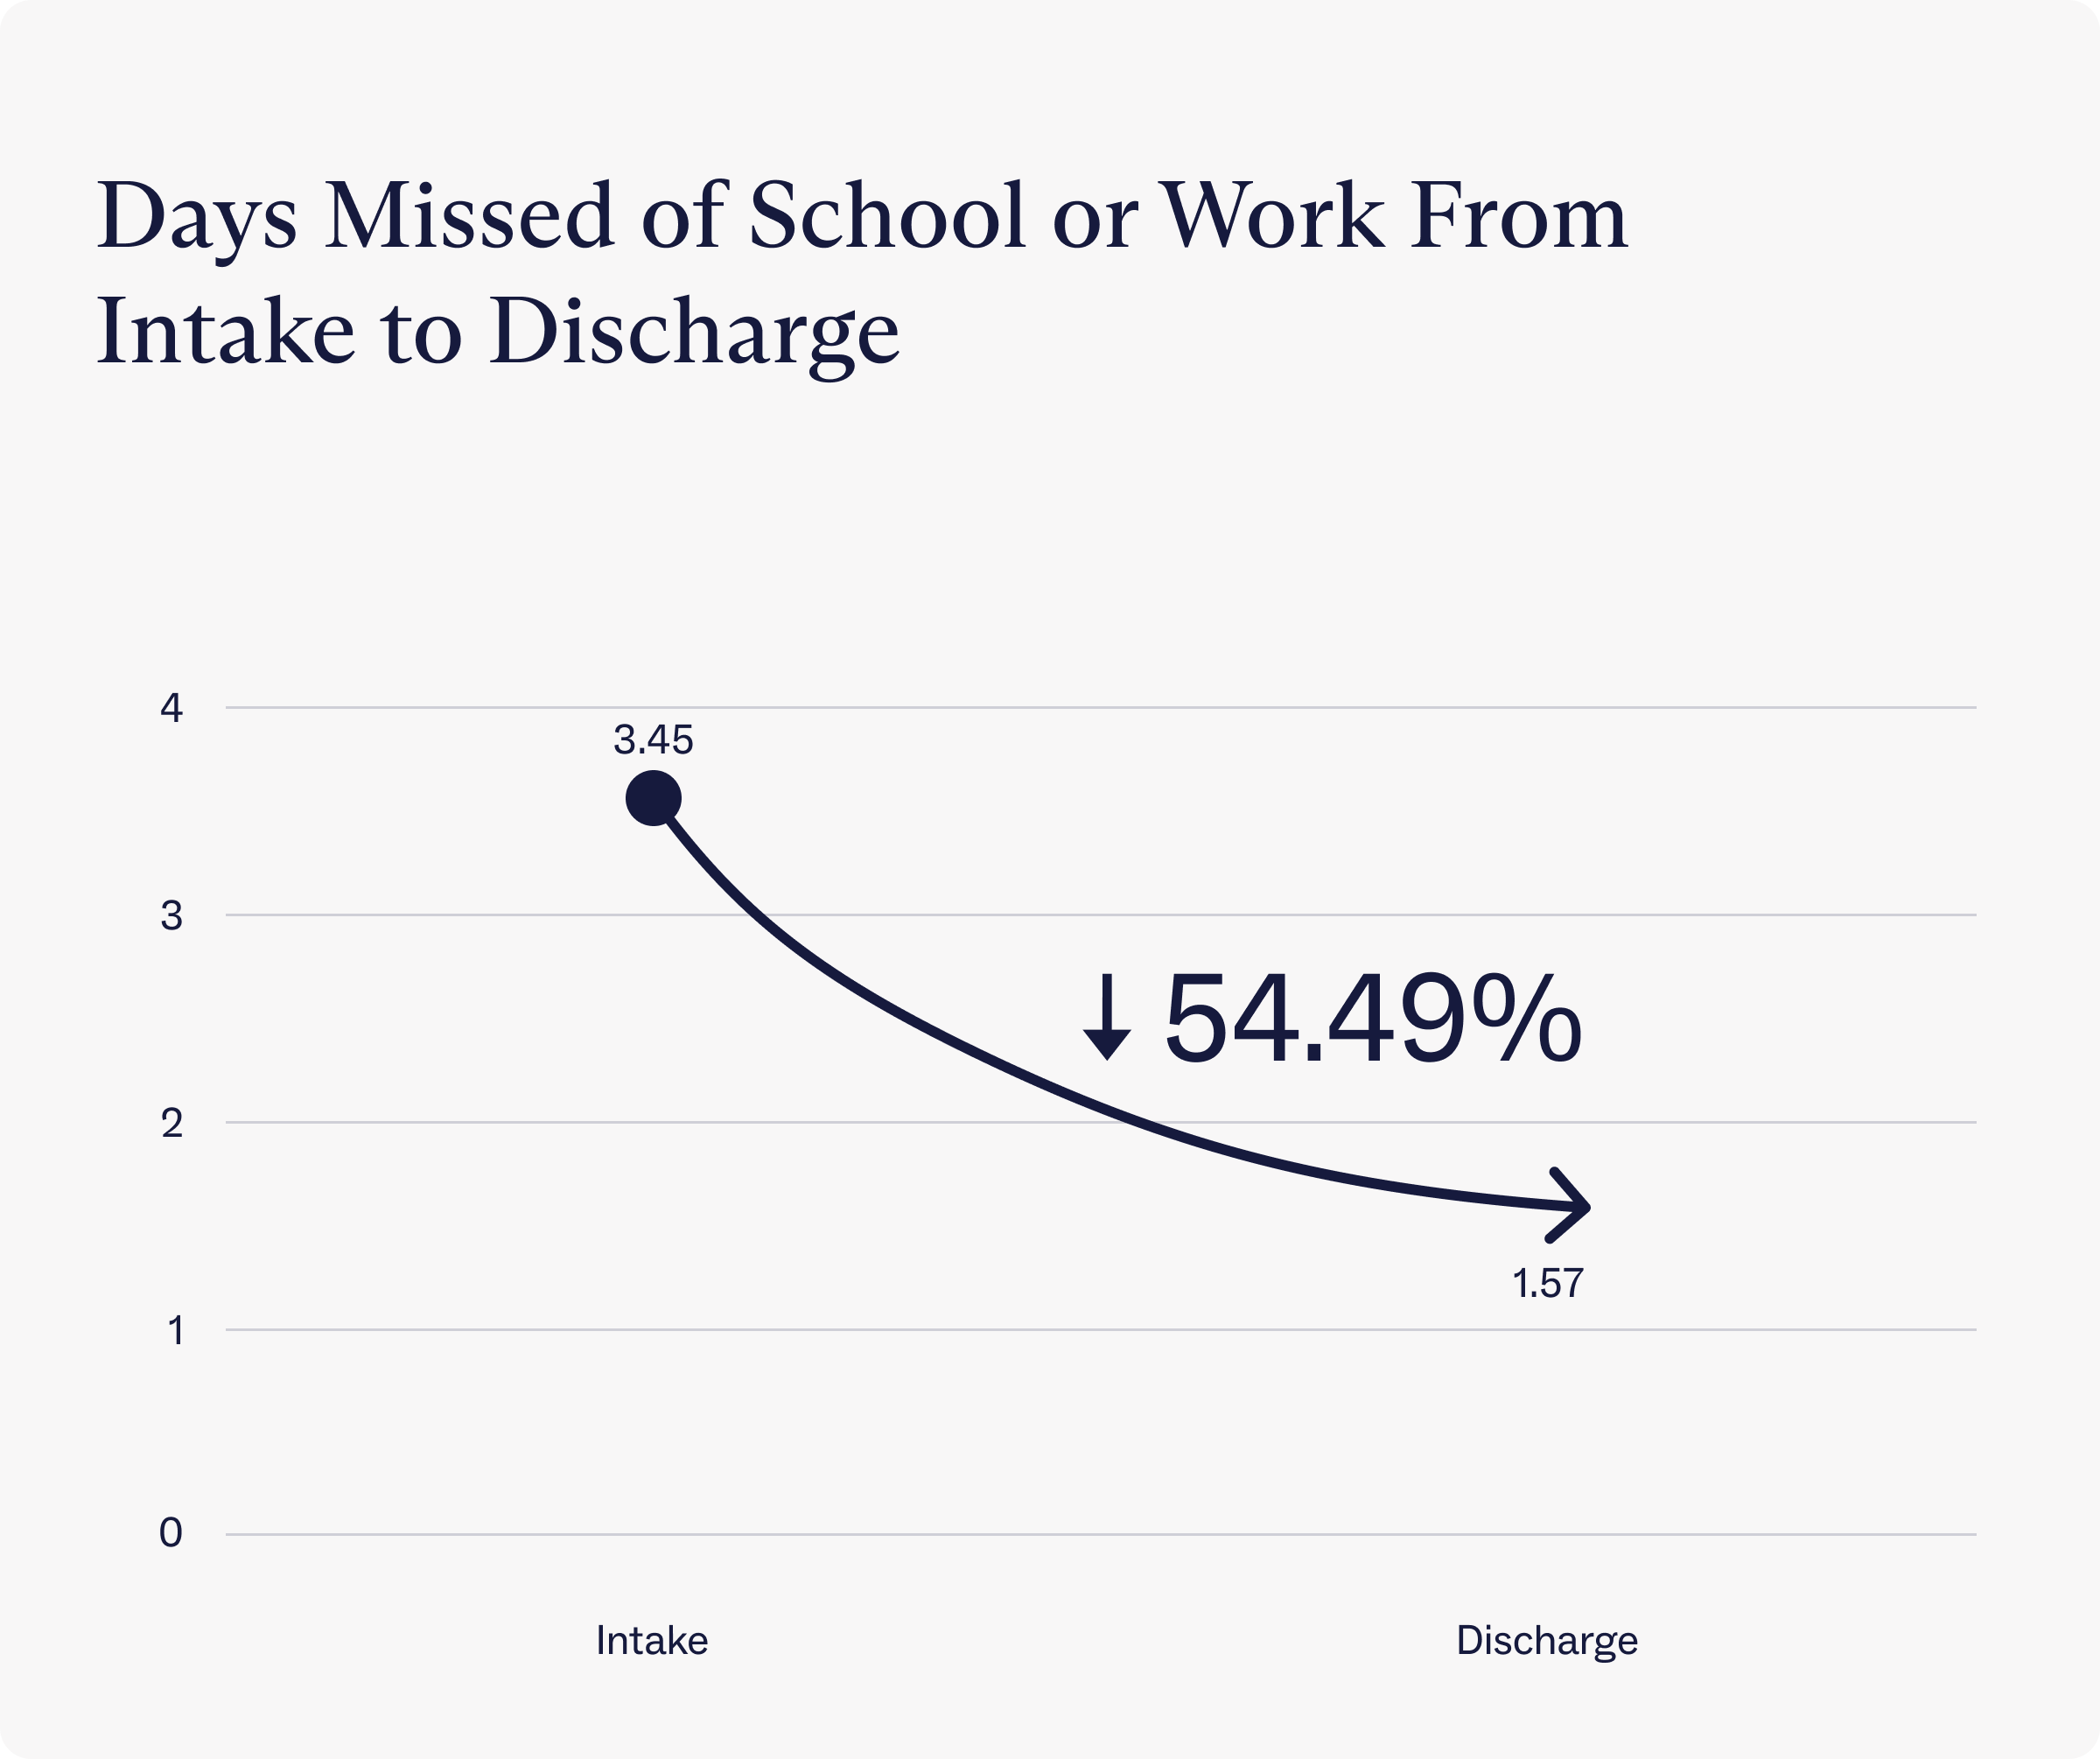 Days missed of school or work from intake to discharge